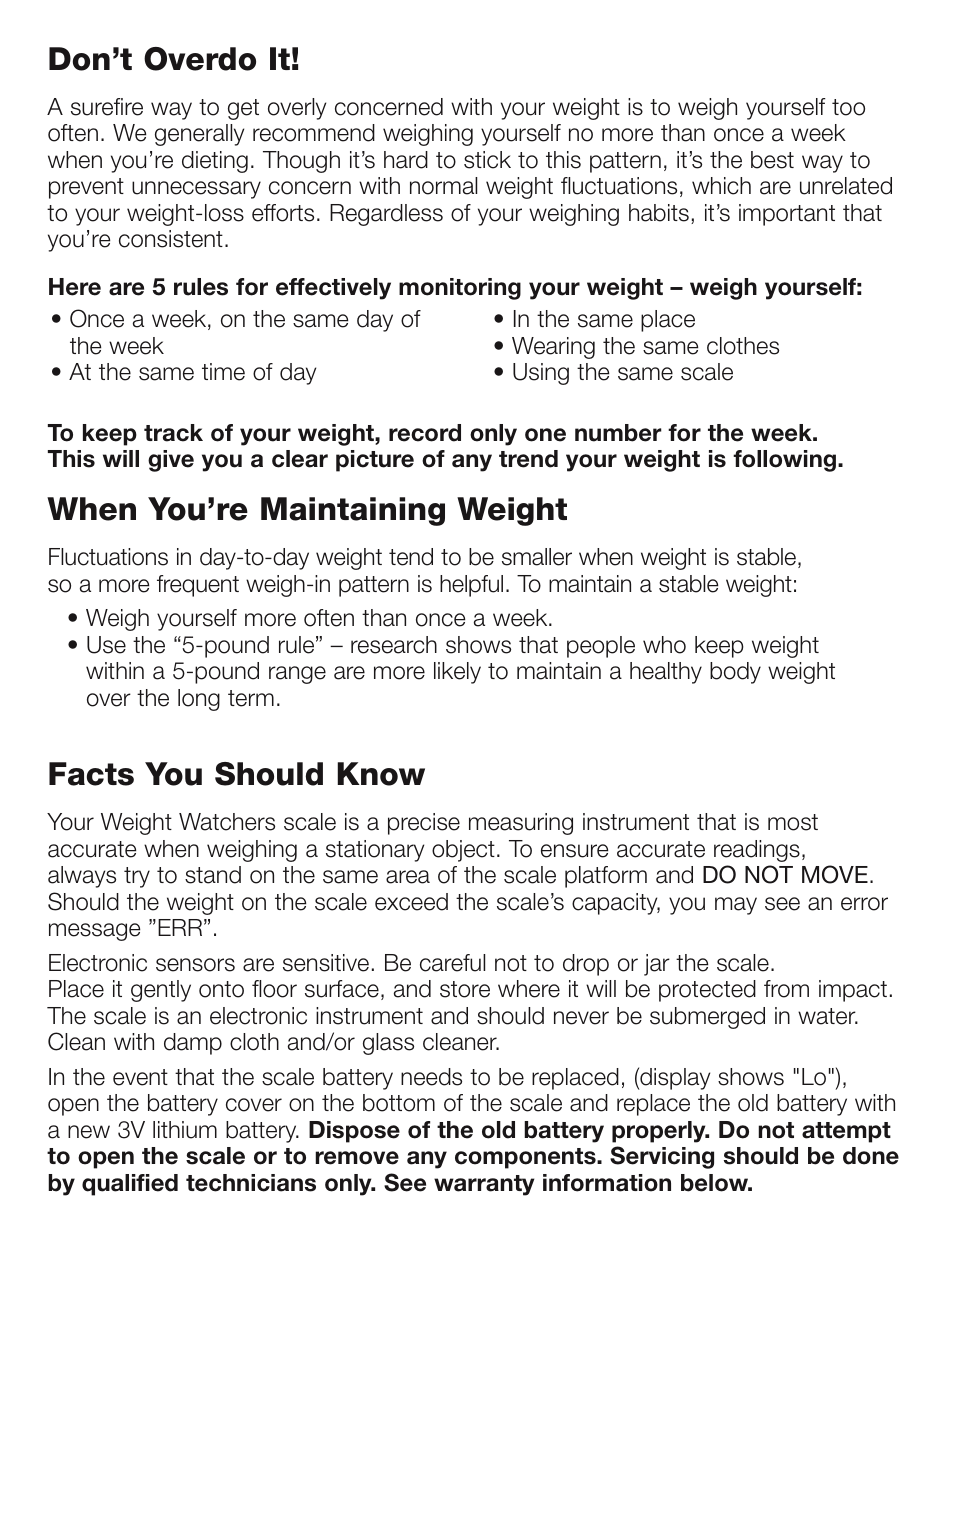 Don’t overdo it, When you’re maintaining weight, Facts you should know